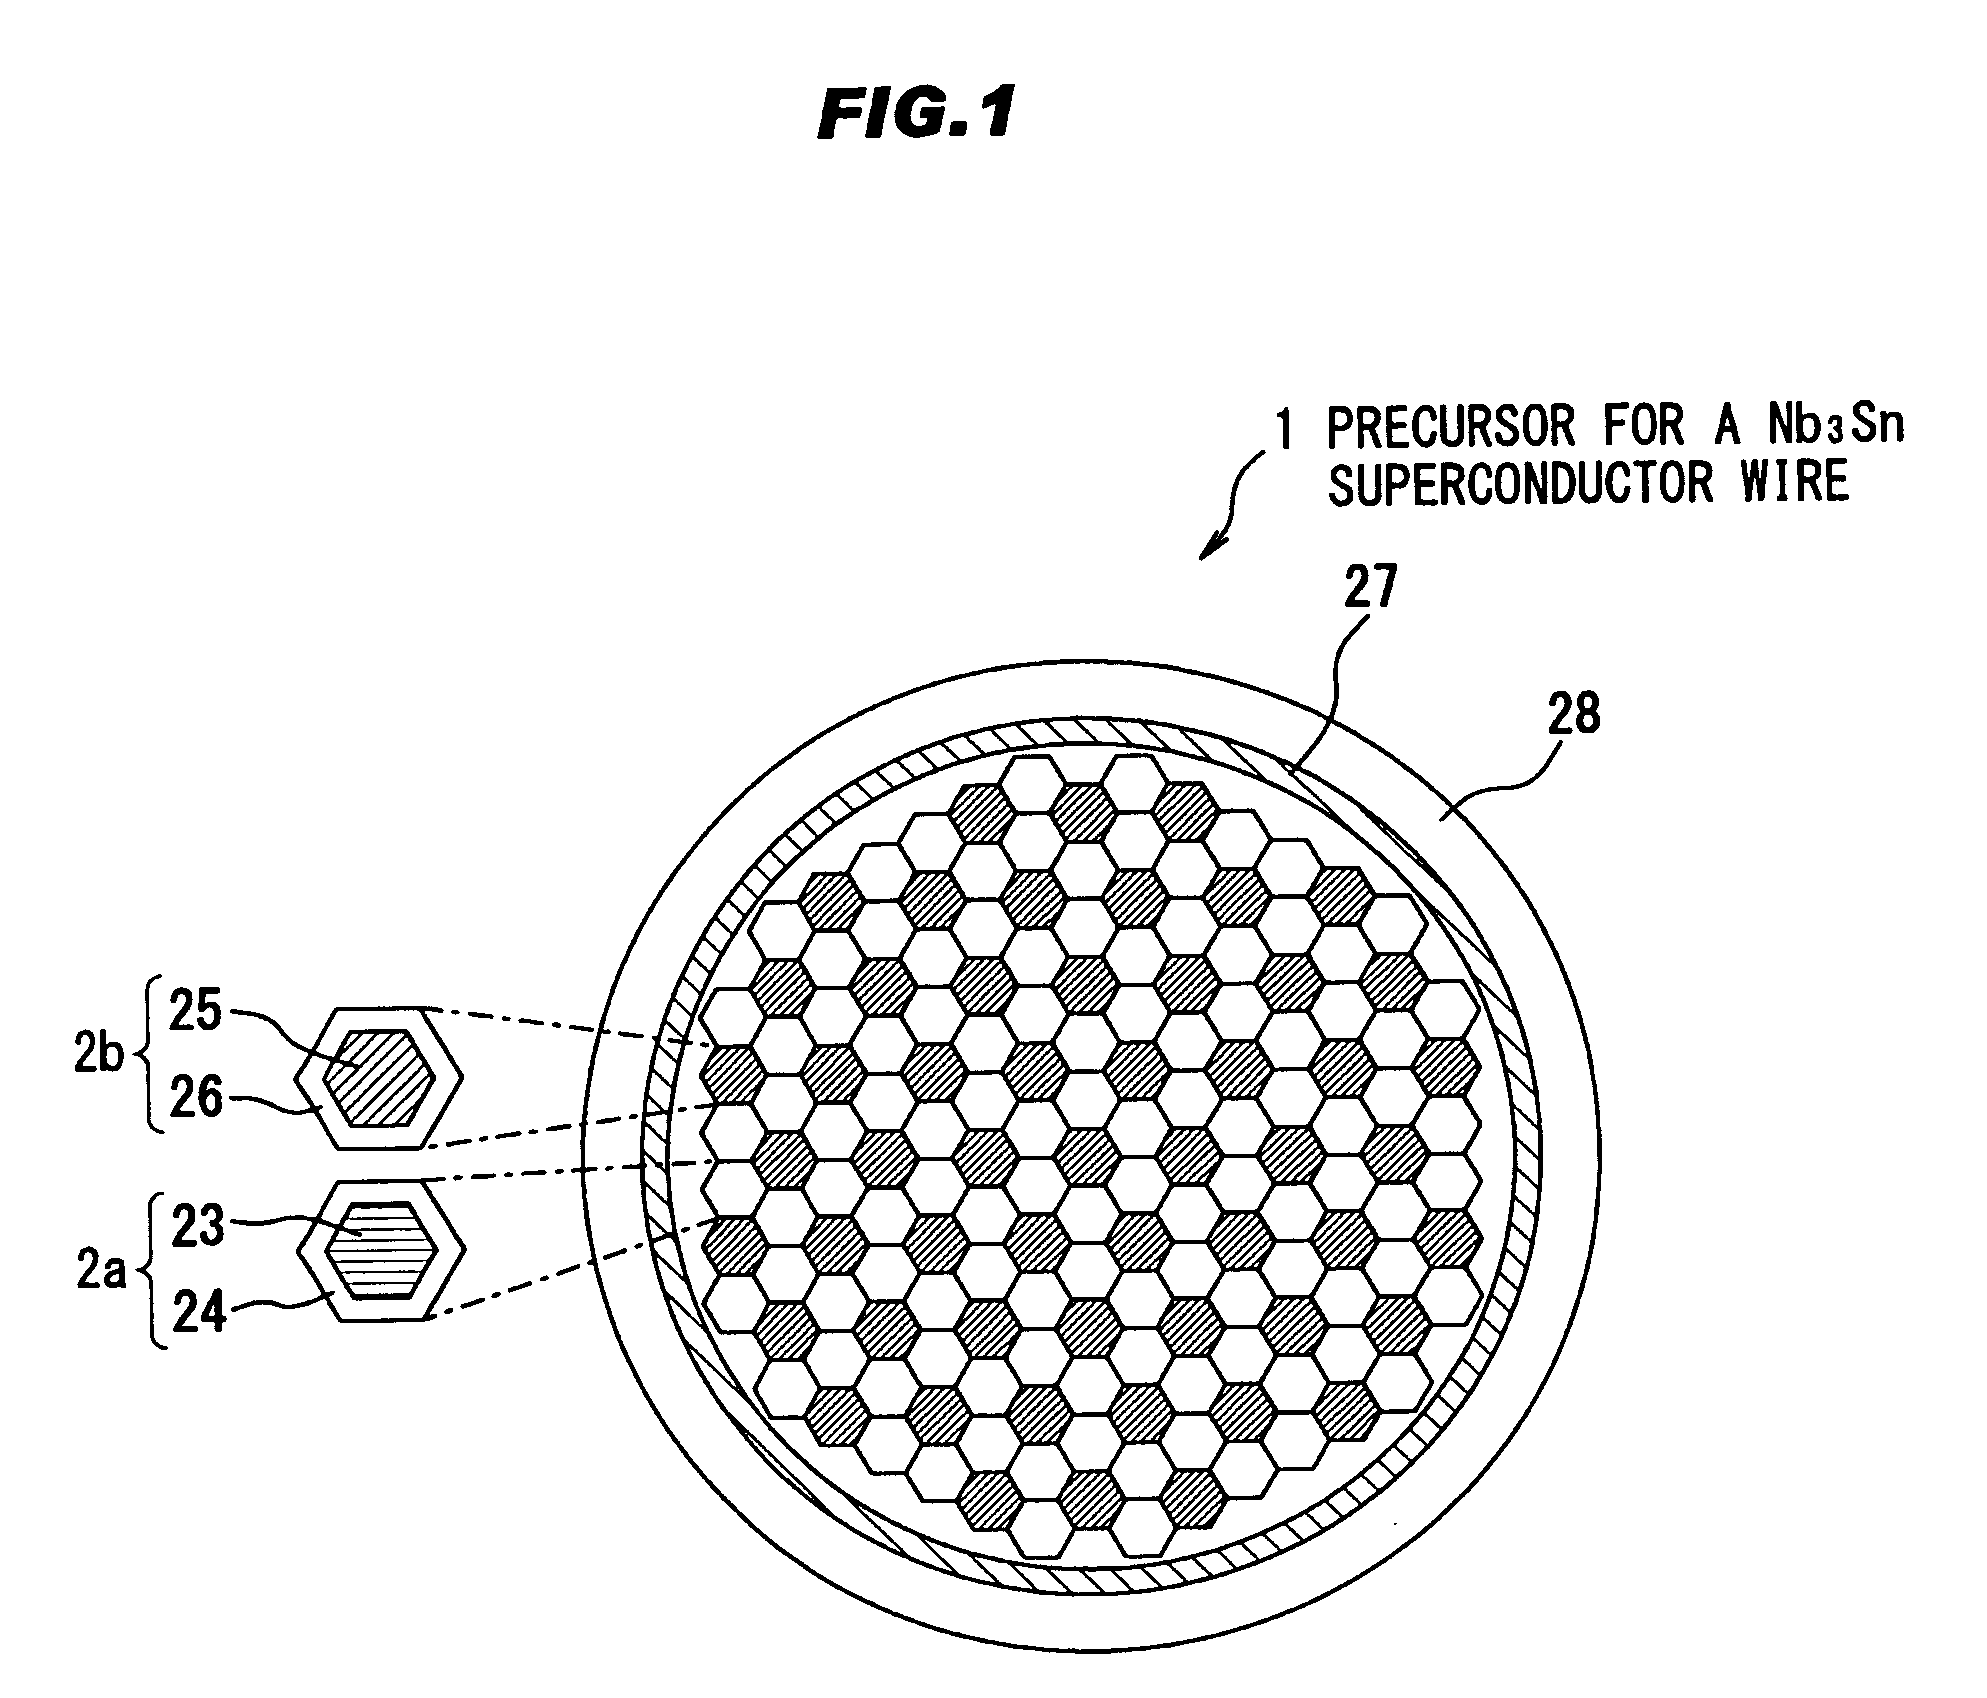 Precursor for a Nb3Sn superconductor wire, method for manufacturing the same, Nb3Sn superconductor wire, and superconducting magnet system